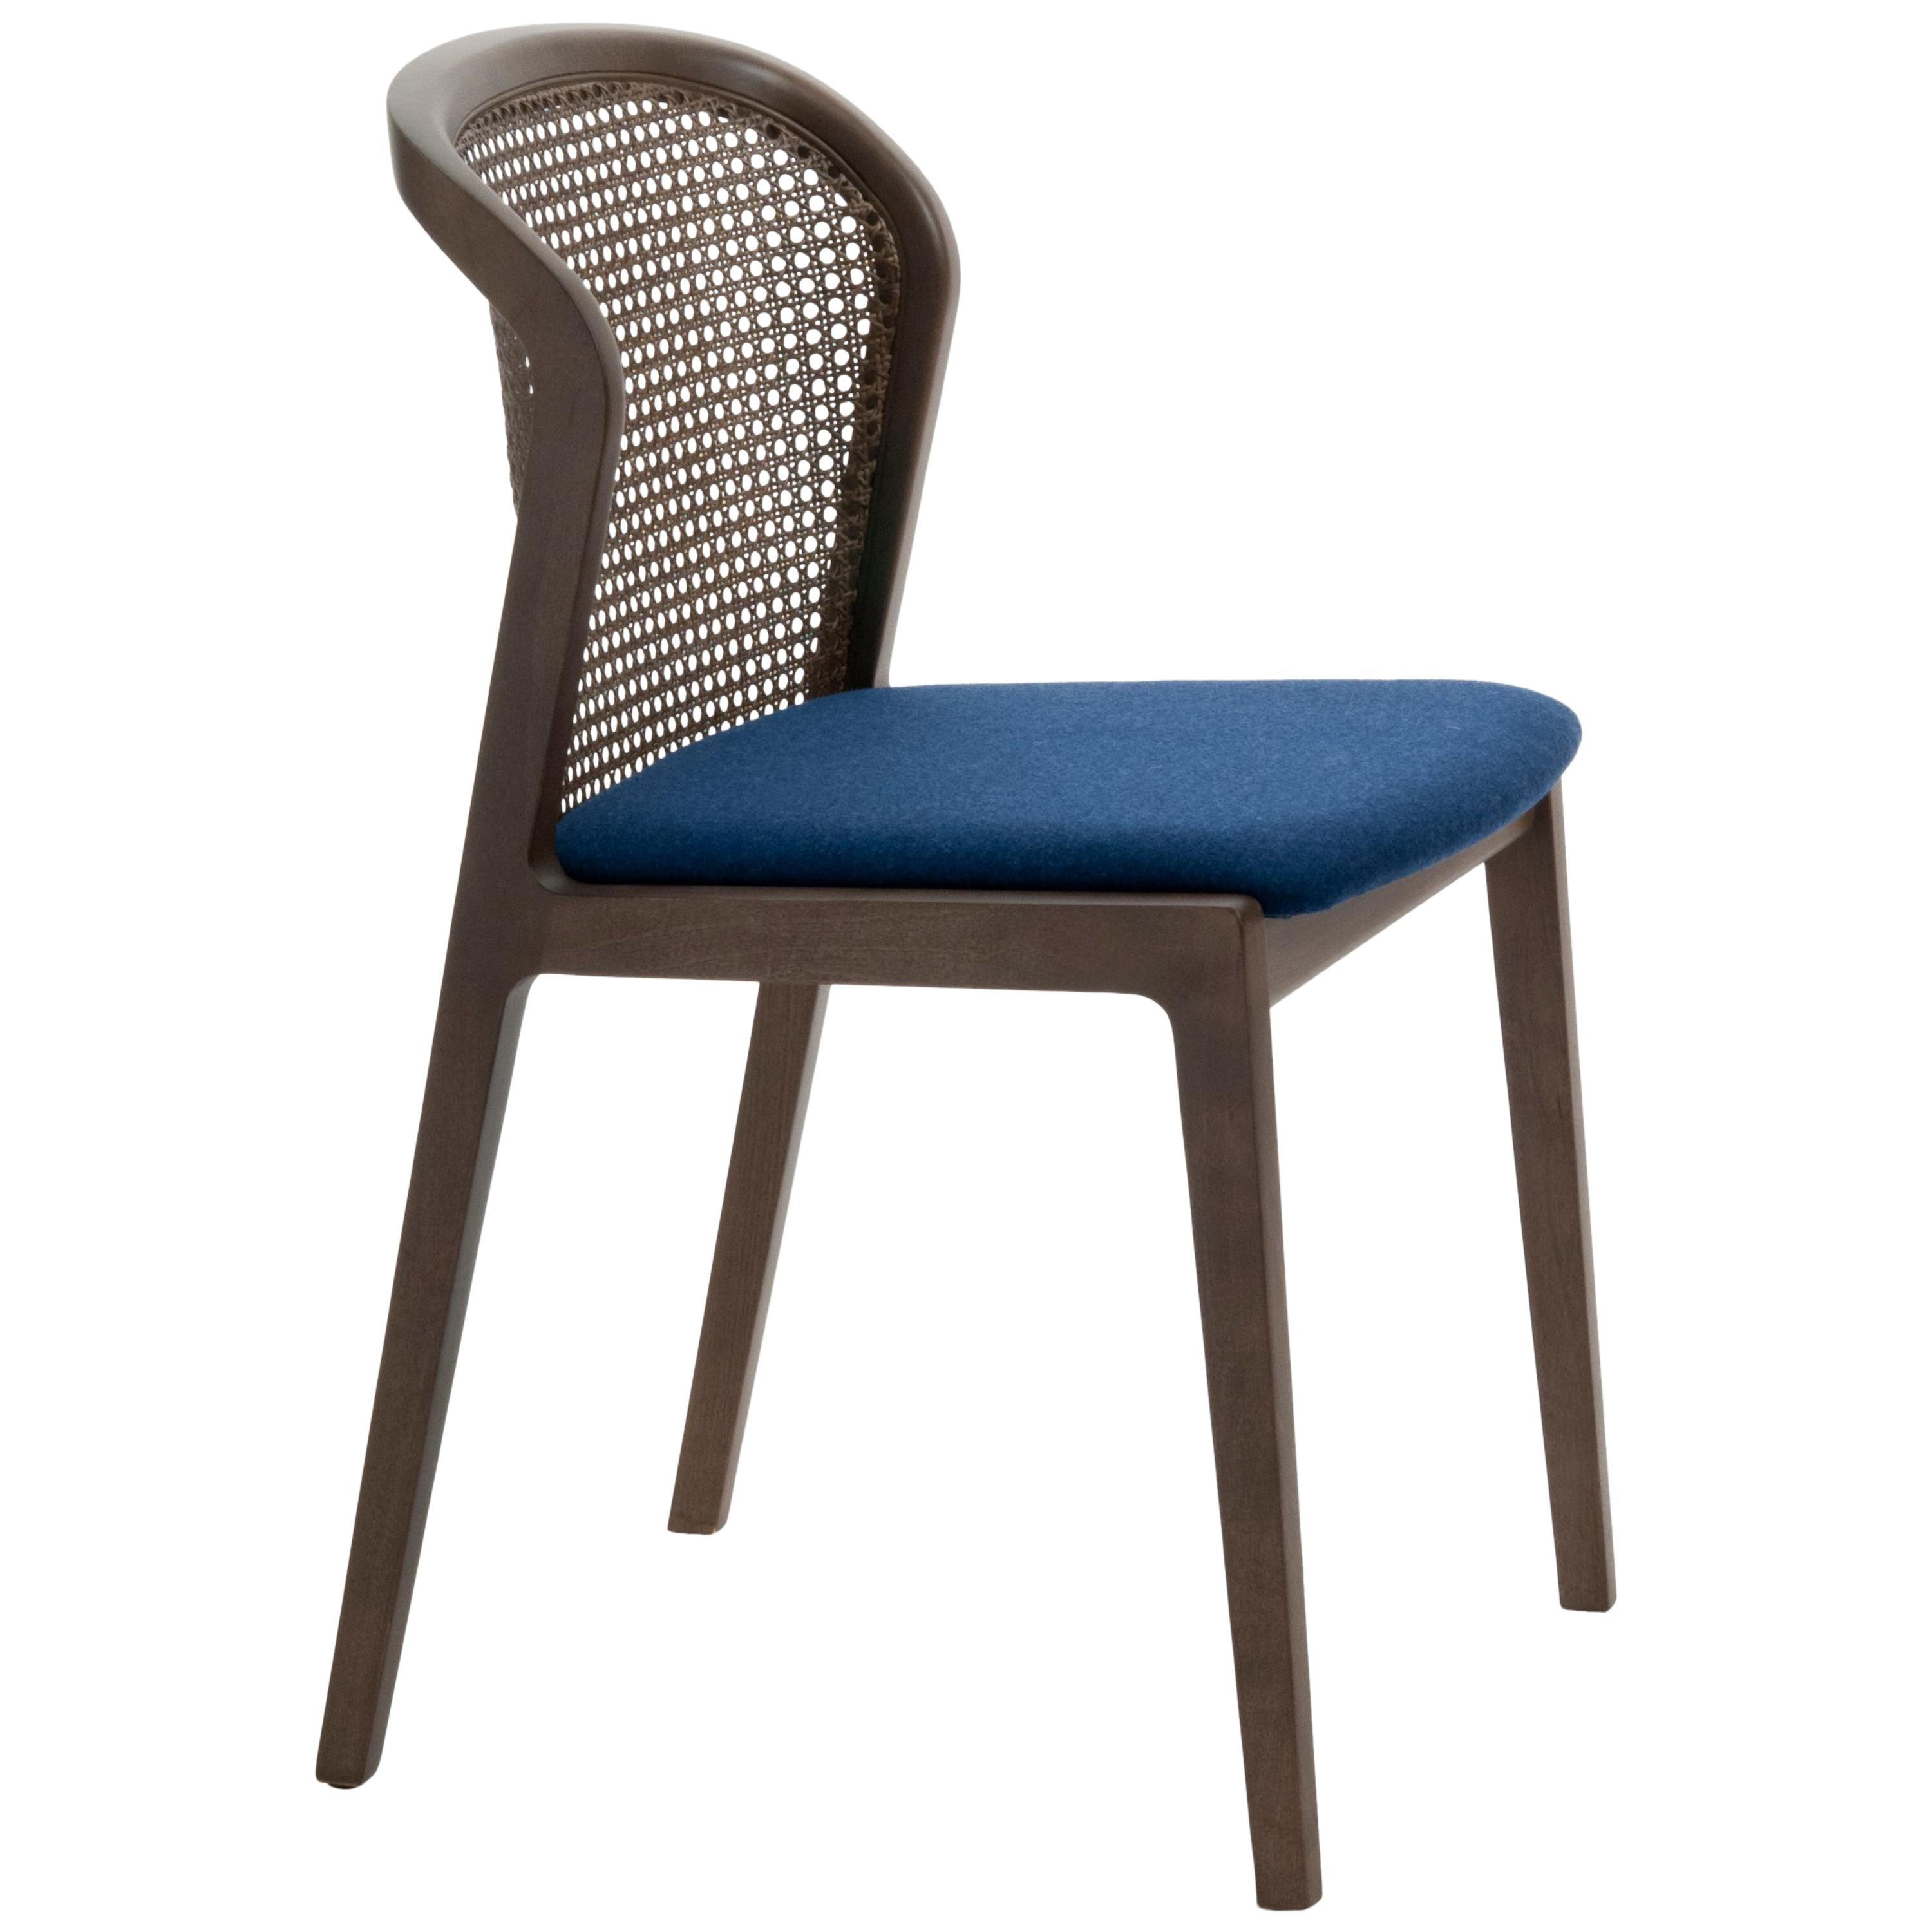 Vienna is an extraordinarily comfortable and elegant chair designed by Emmanuel Gallina who loves to quote Brancusi when saying that “simplicity is complexity resolved”. Inspired to the 1950s of Marcel Gascoin, but also to Vienna at the end of the